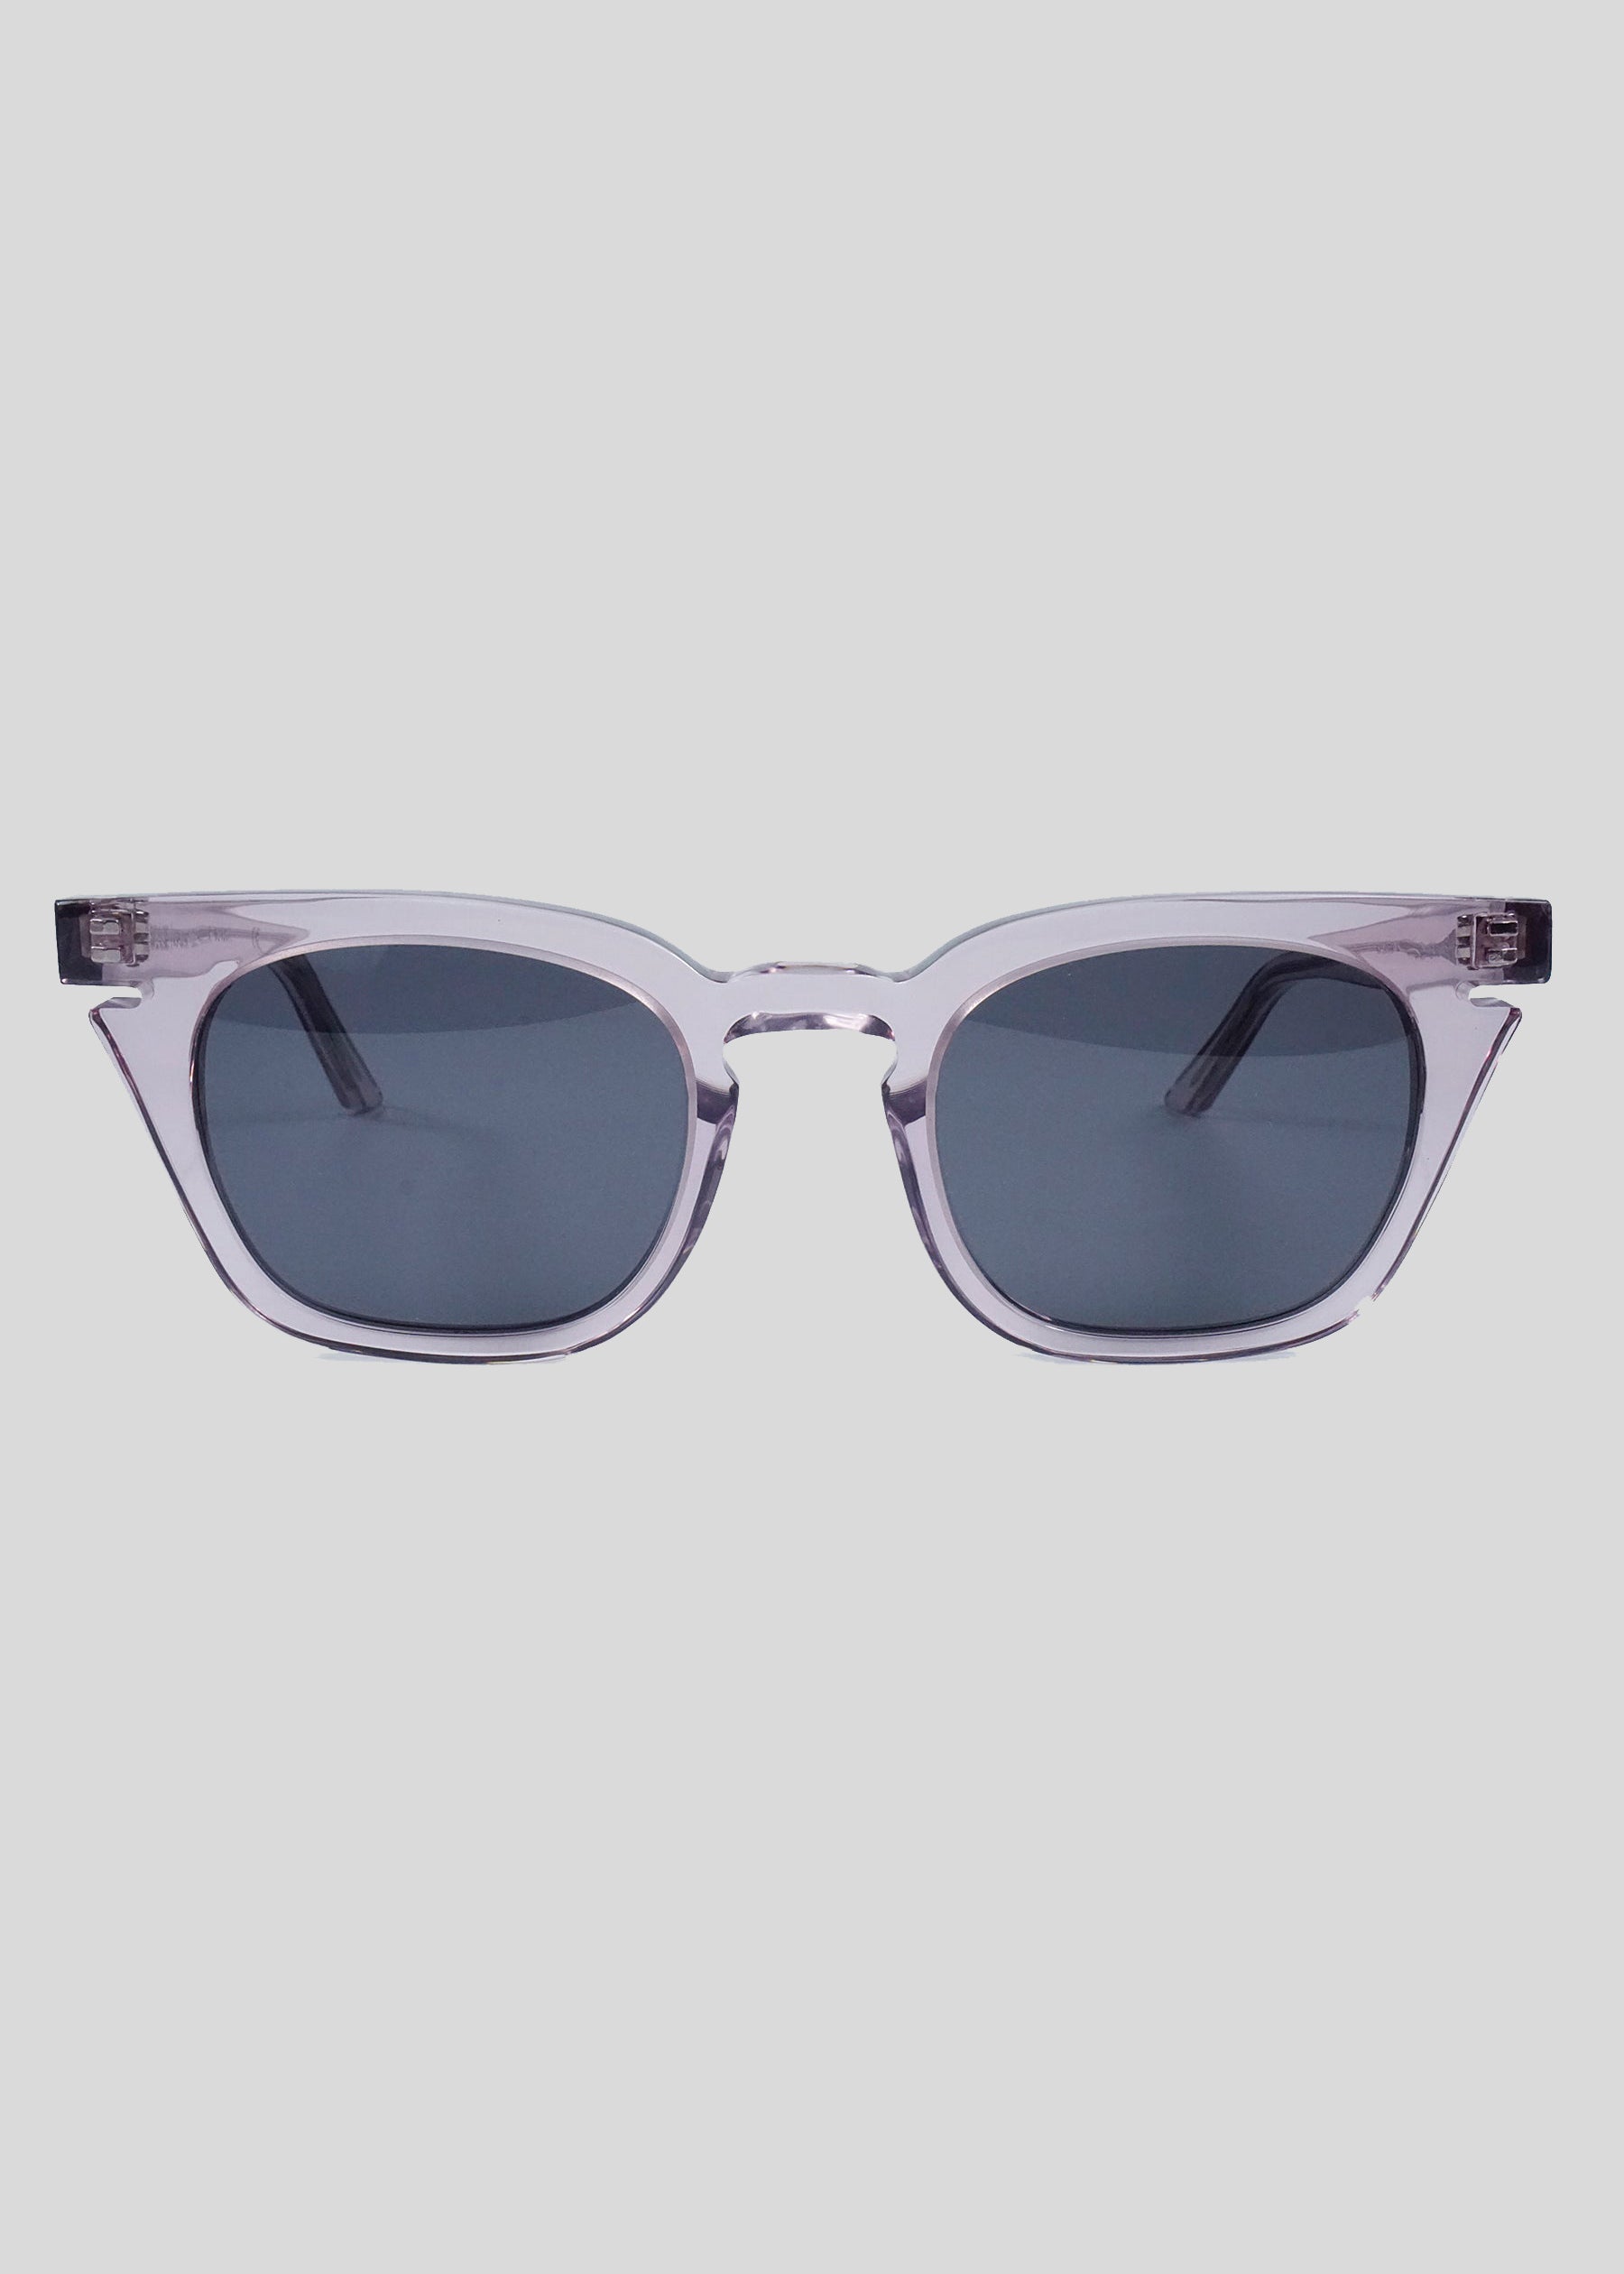 Roseland Lilac Sunglasses front